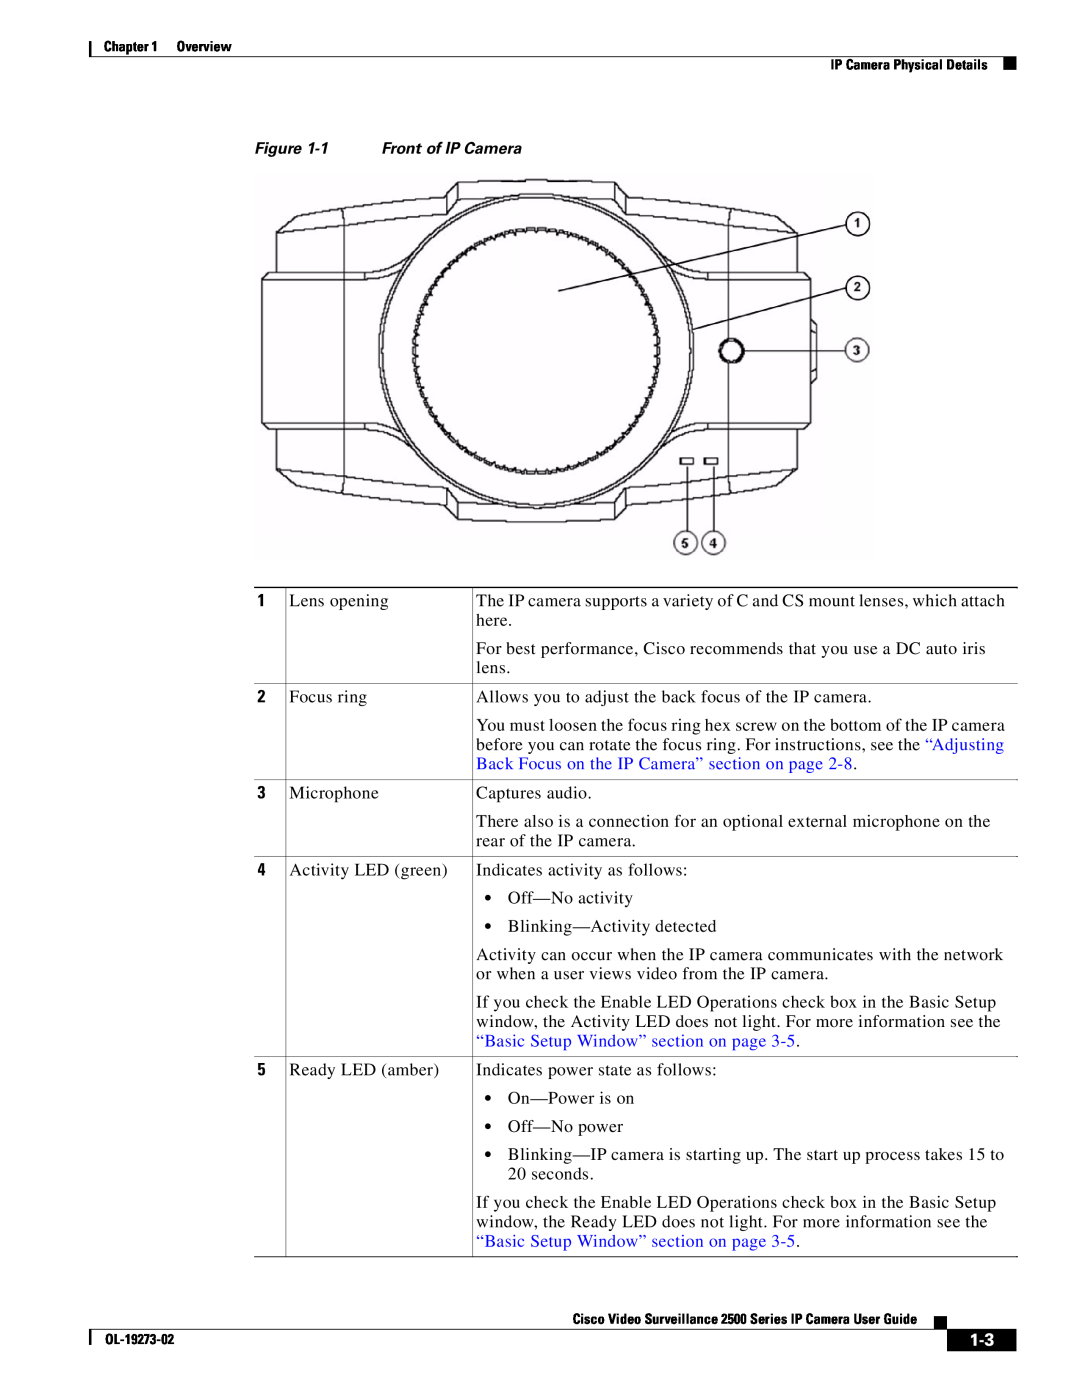 Cisco Systems CIVS-IPC-2500 manual Back Focus on the IP Camera” section on page, “Basic Setup Window” section on page 